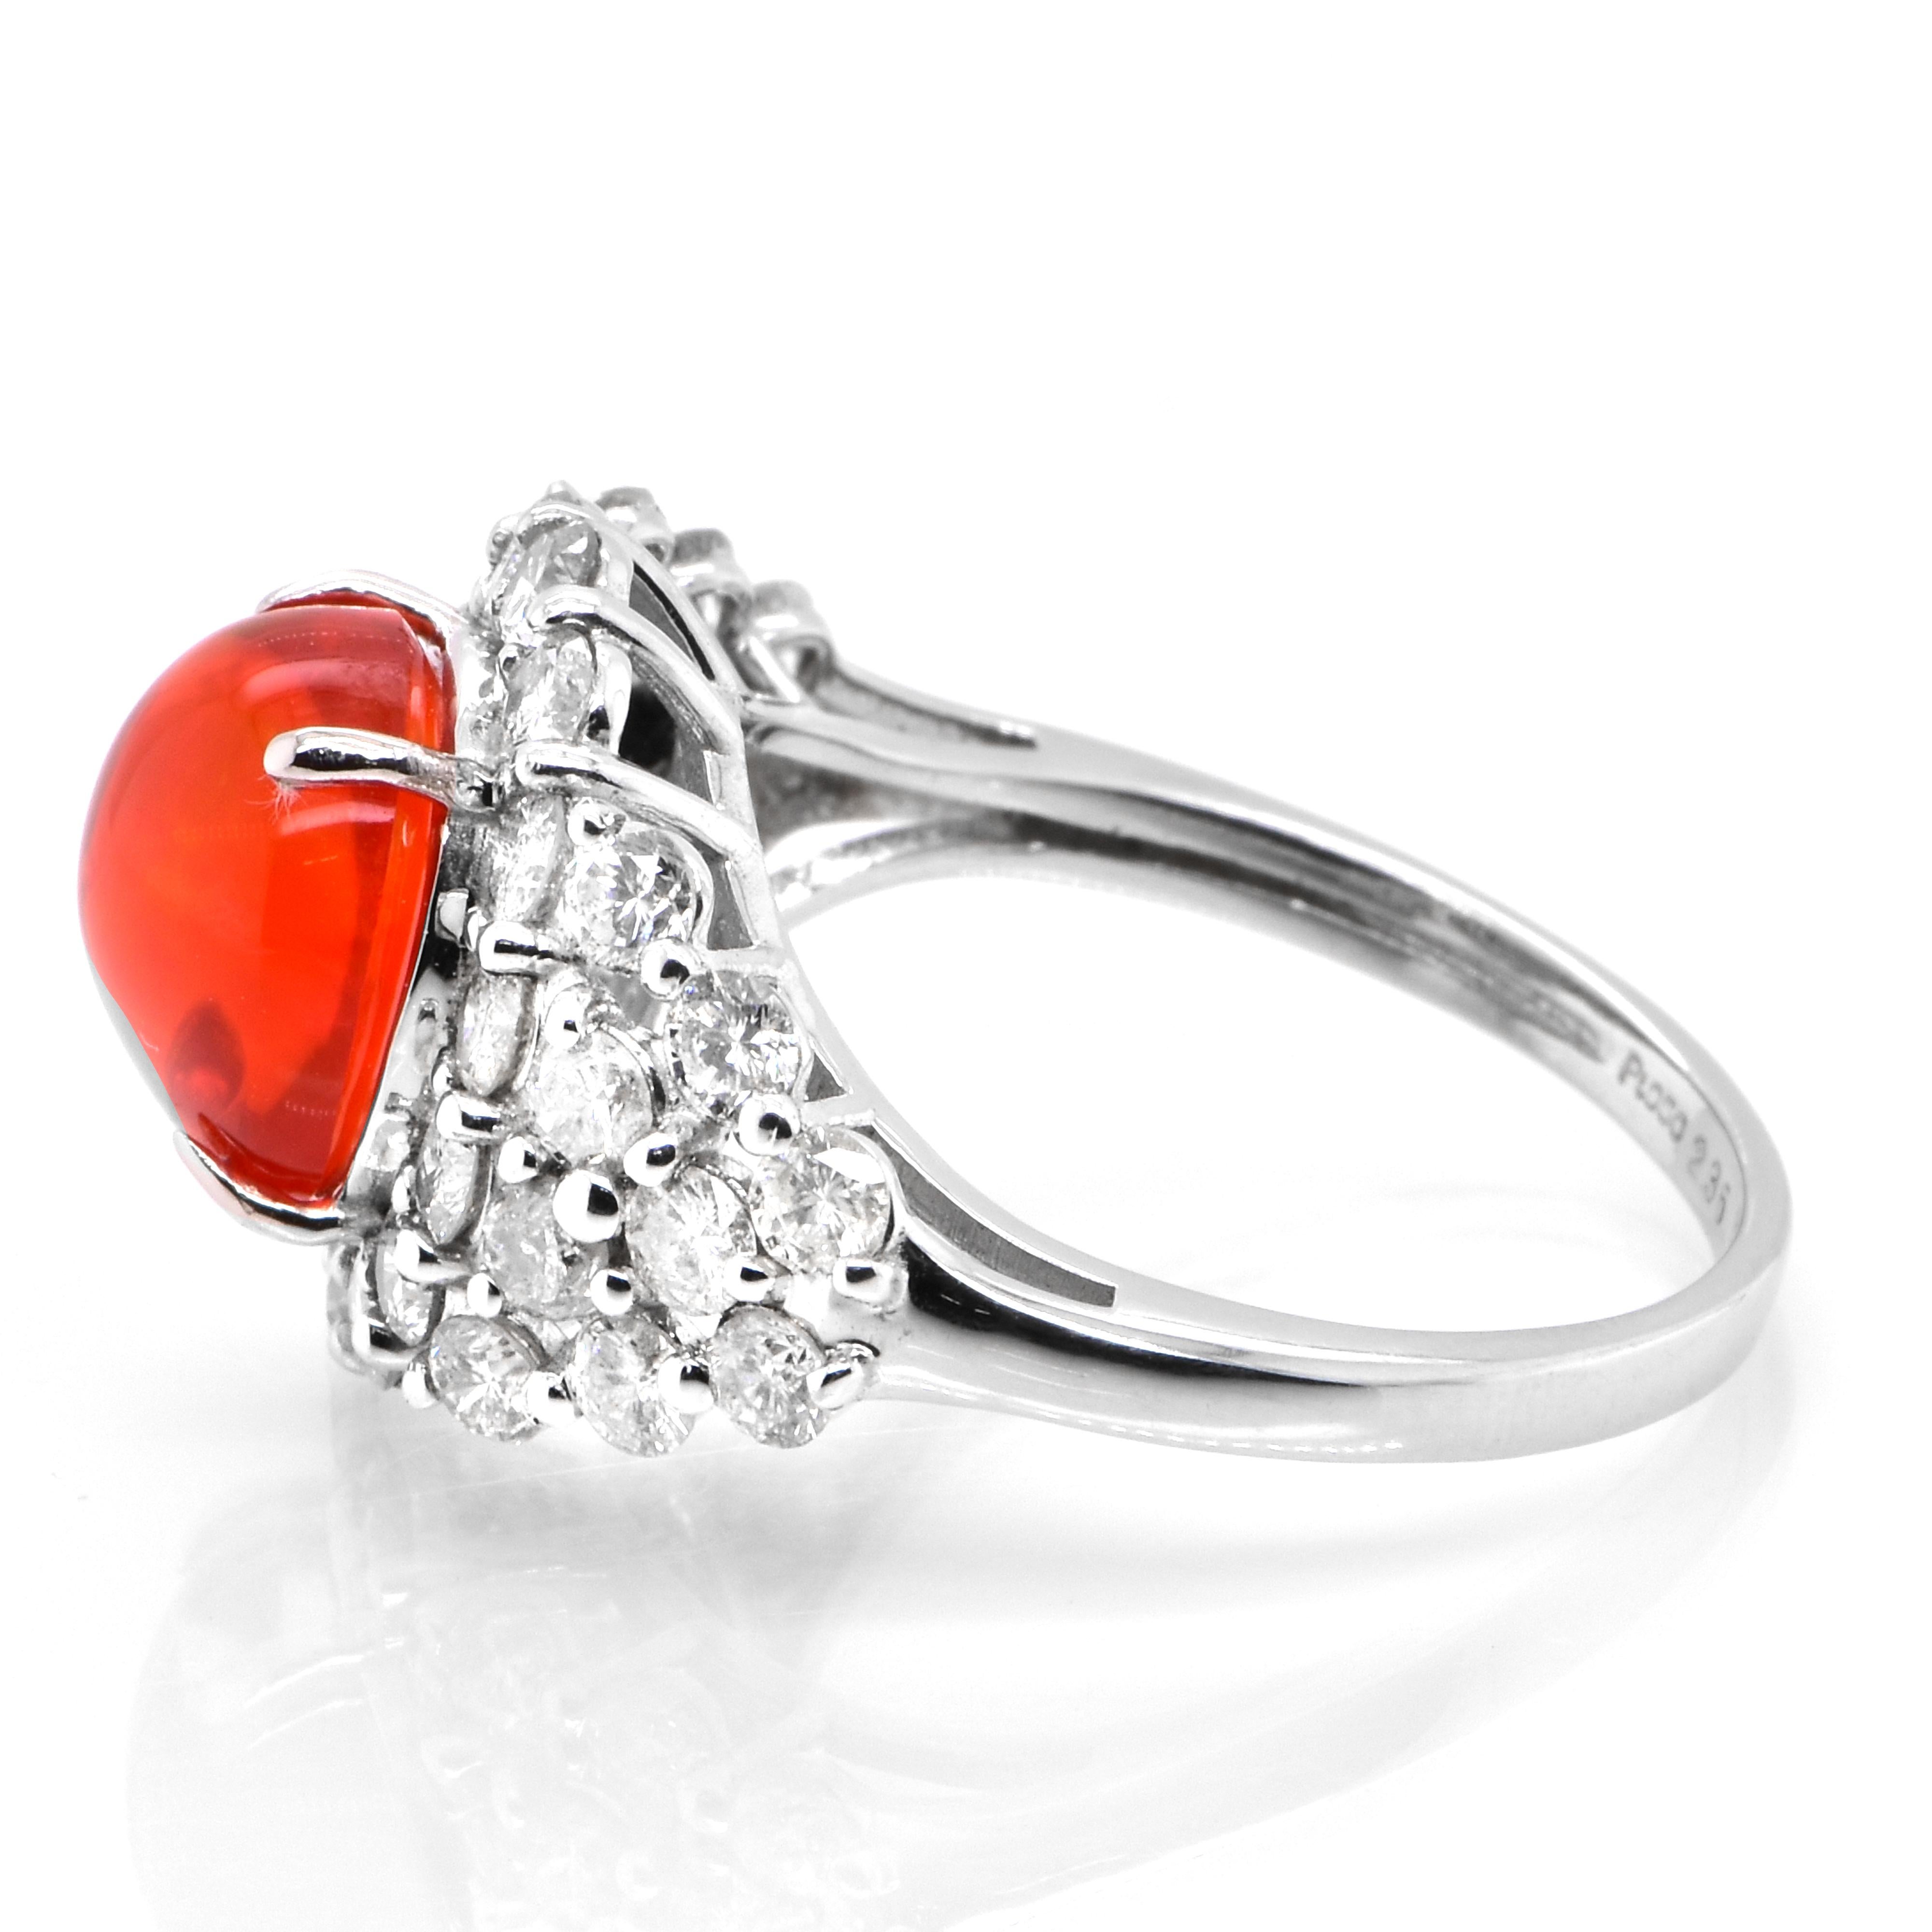 Cabochon 2.36 Carat Natural Mexican Fire Opal and Diamond Cocktail Ring Set in Platinum For Sale